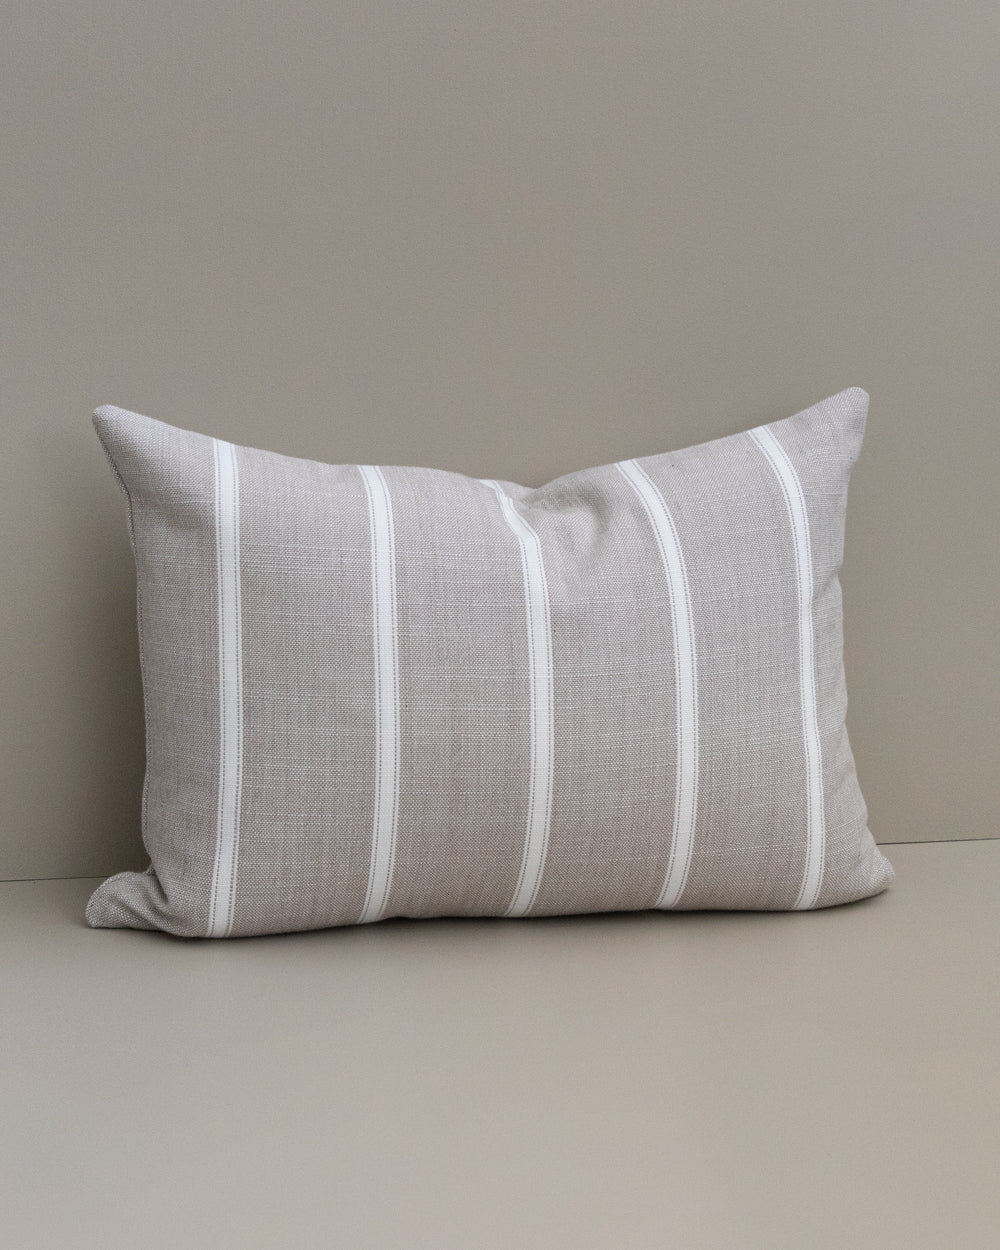 Sydney Outdoor Pillow Cover, Sand